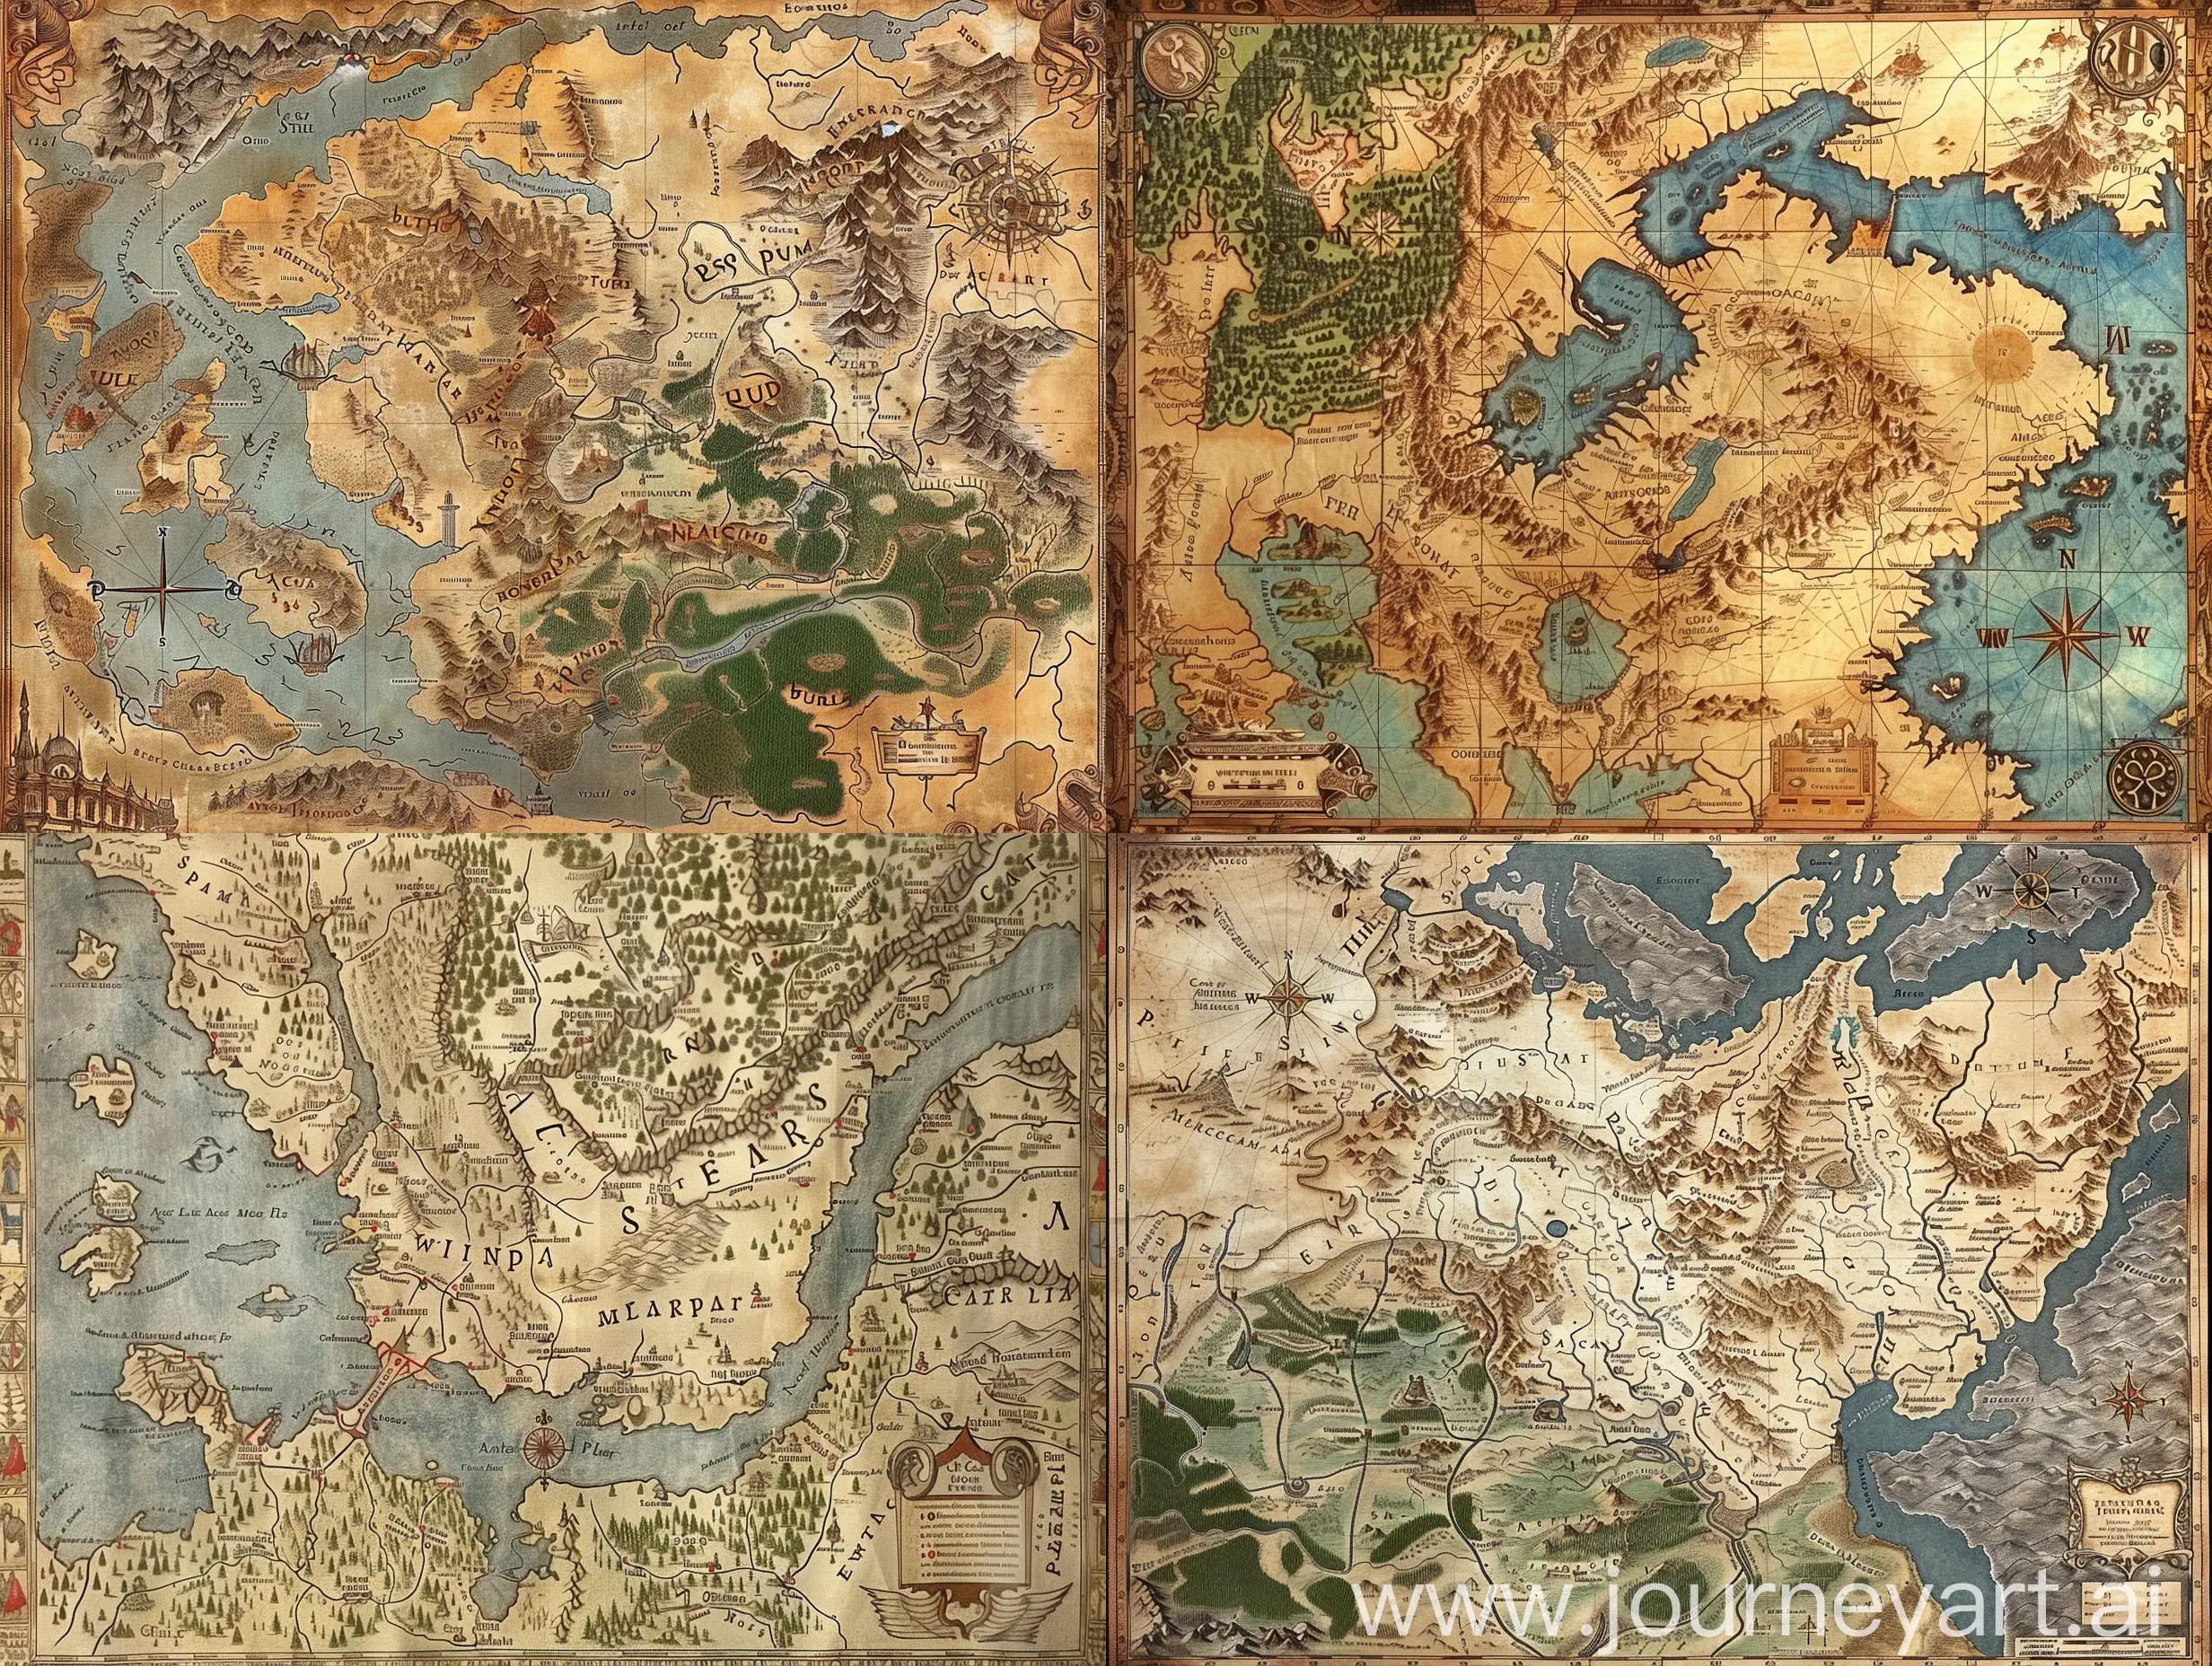 Extremely detailed map, like J.R.R Tolkien's, medieval, without names.